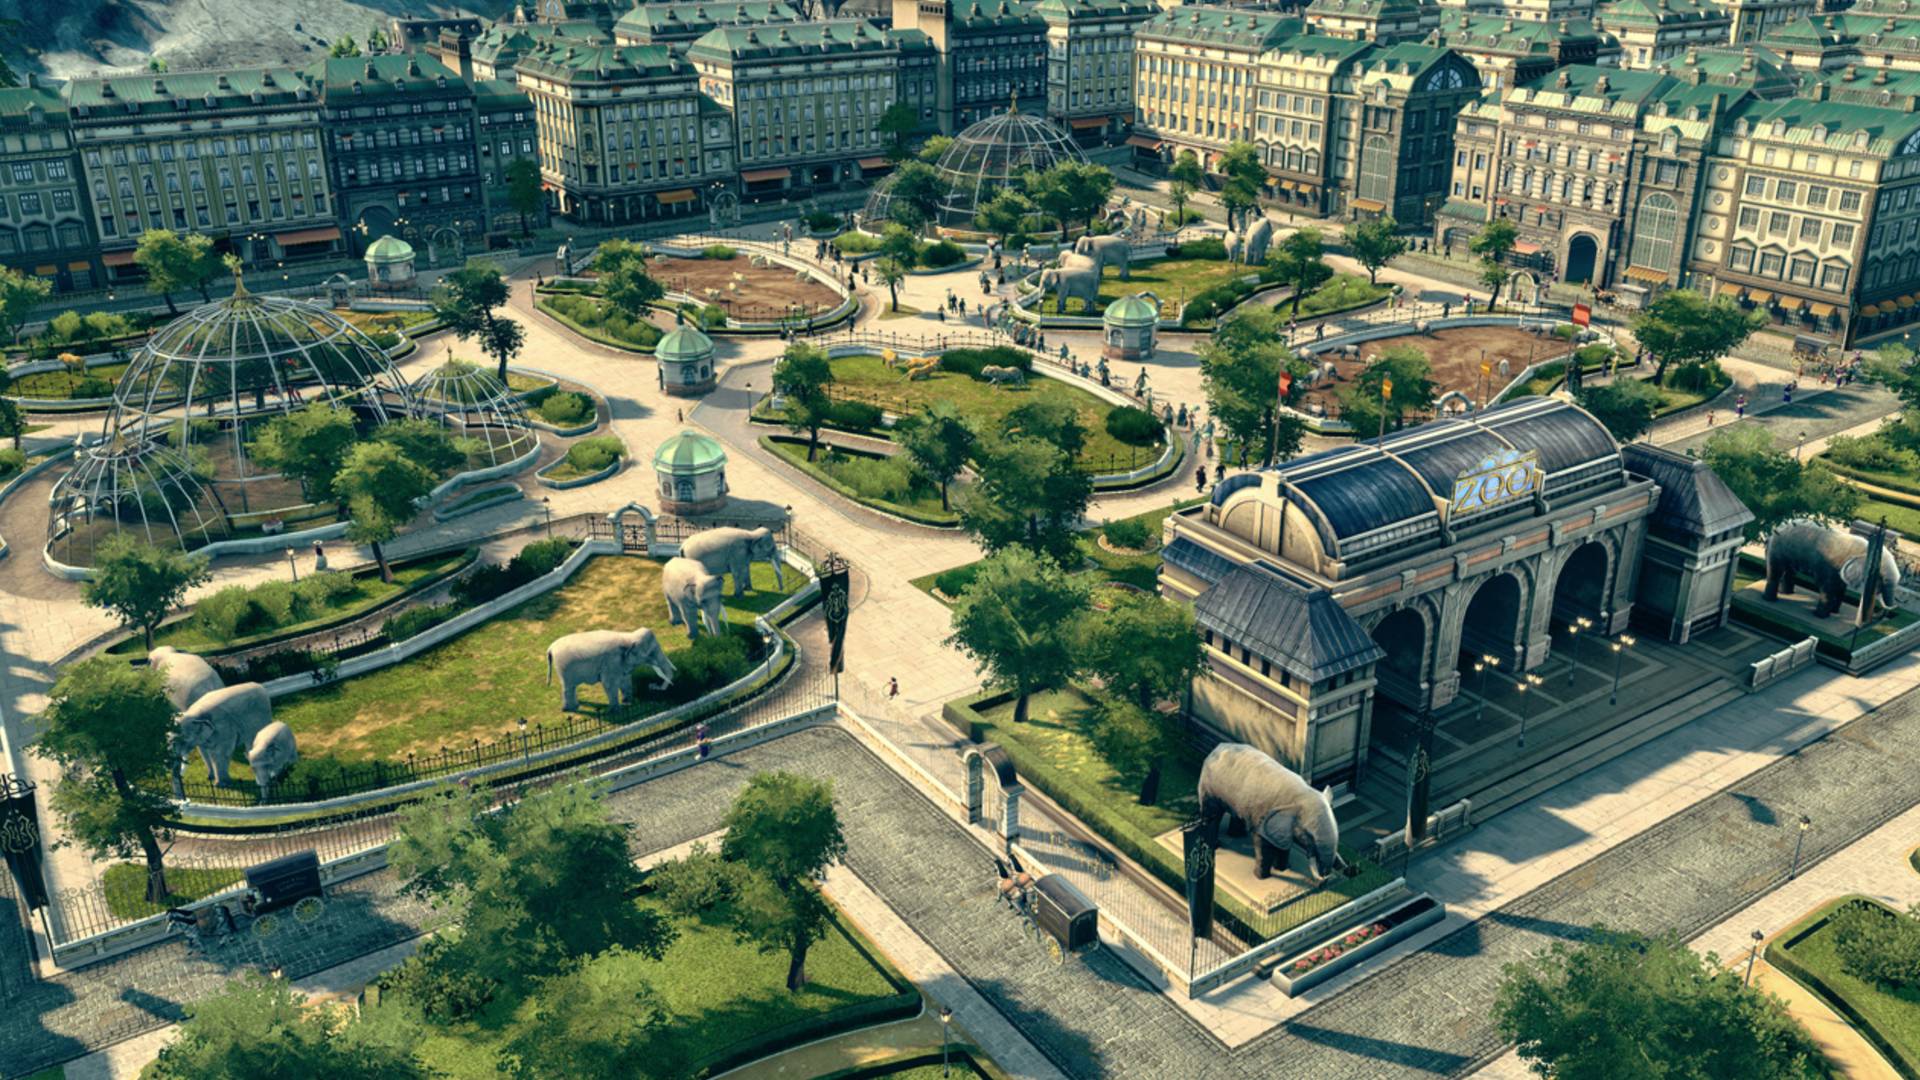 Best city-building games: Anno 1800. Image shows a park filled with statues and glass spheres.